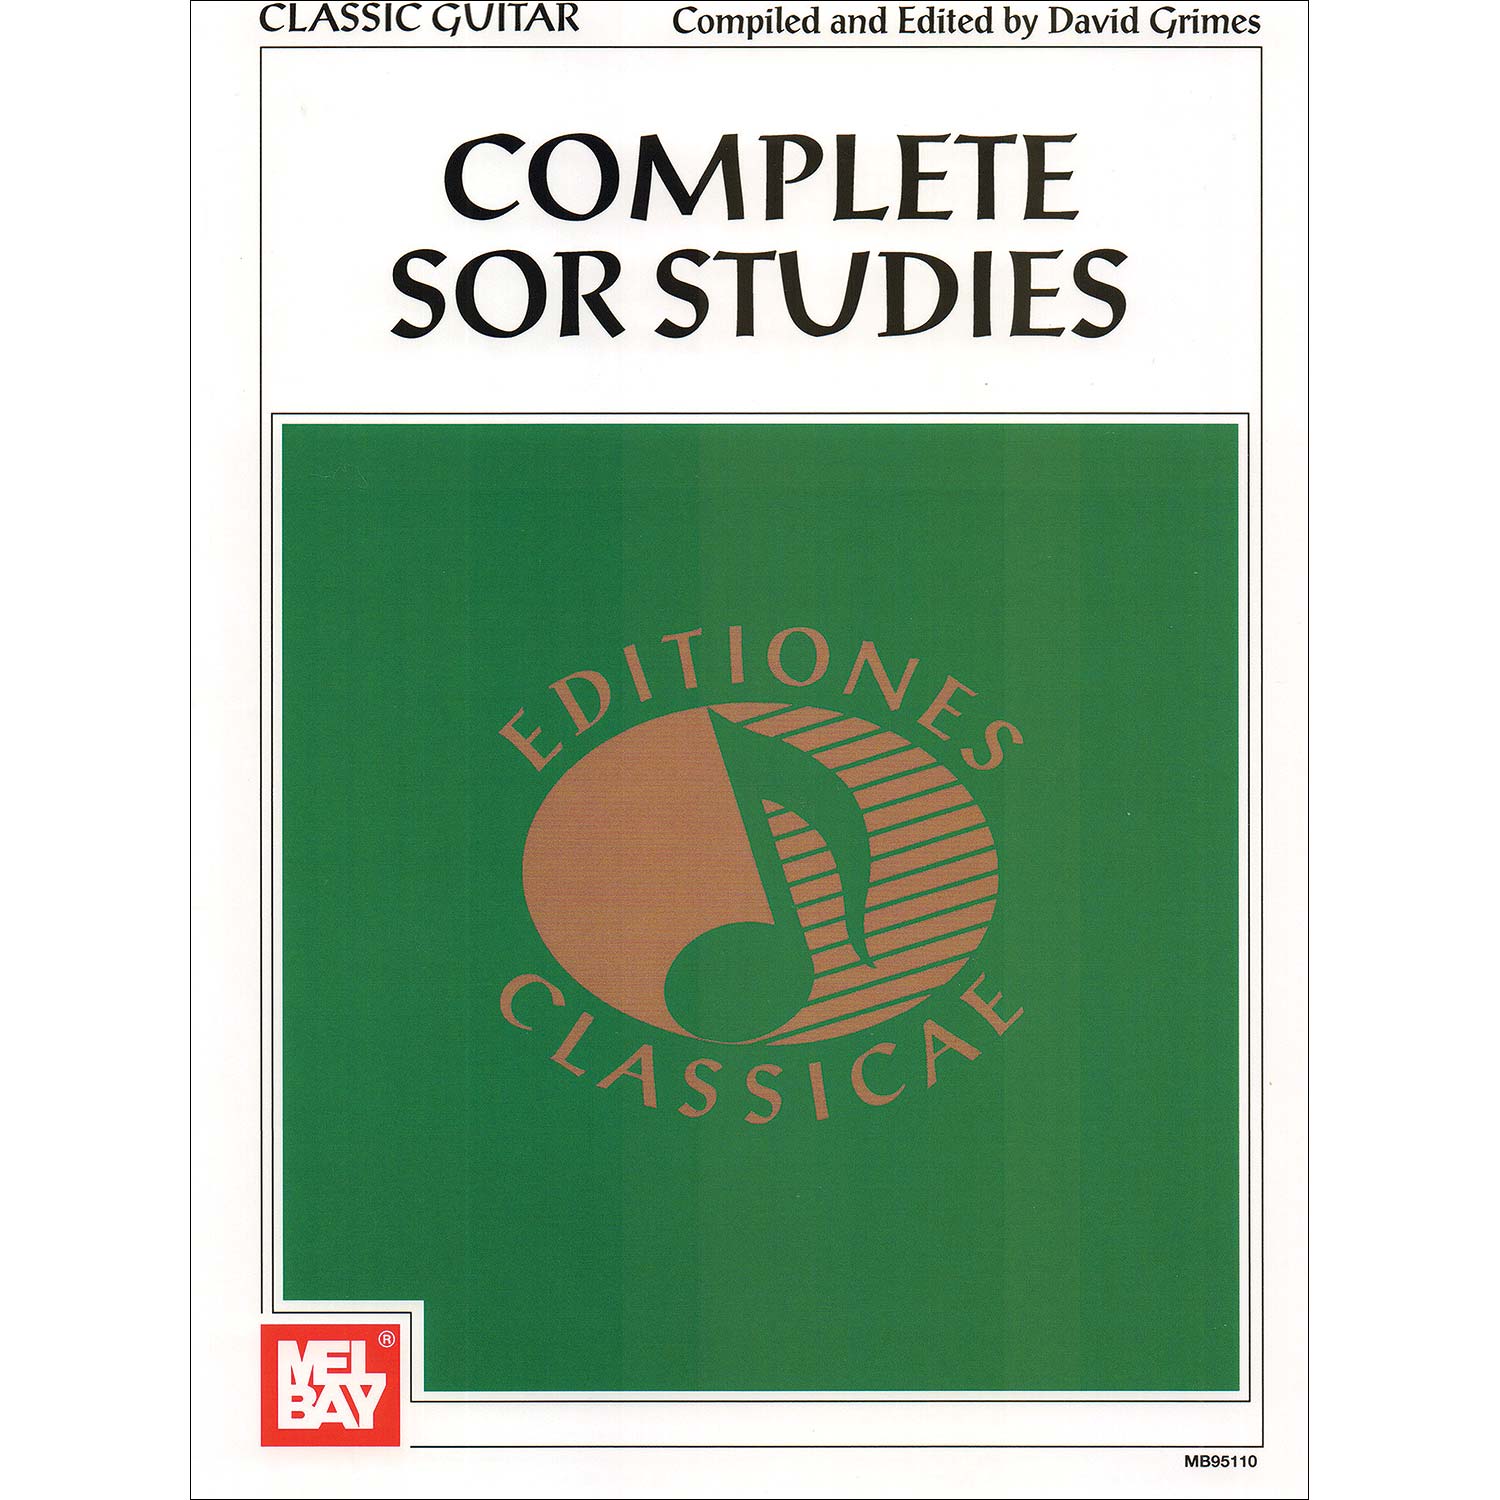 Complete Sor Studies for classical guitar, edited by David Grimes